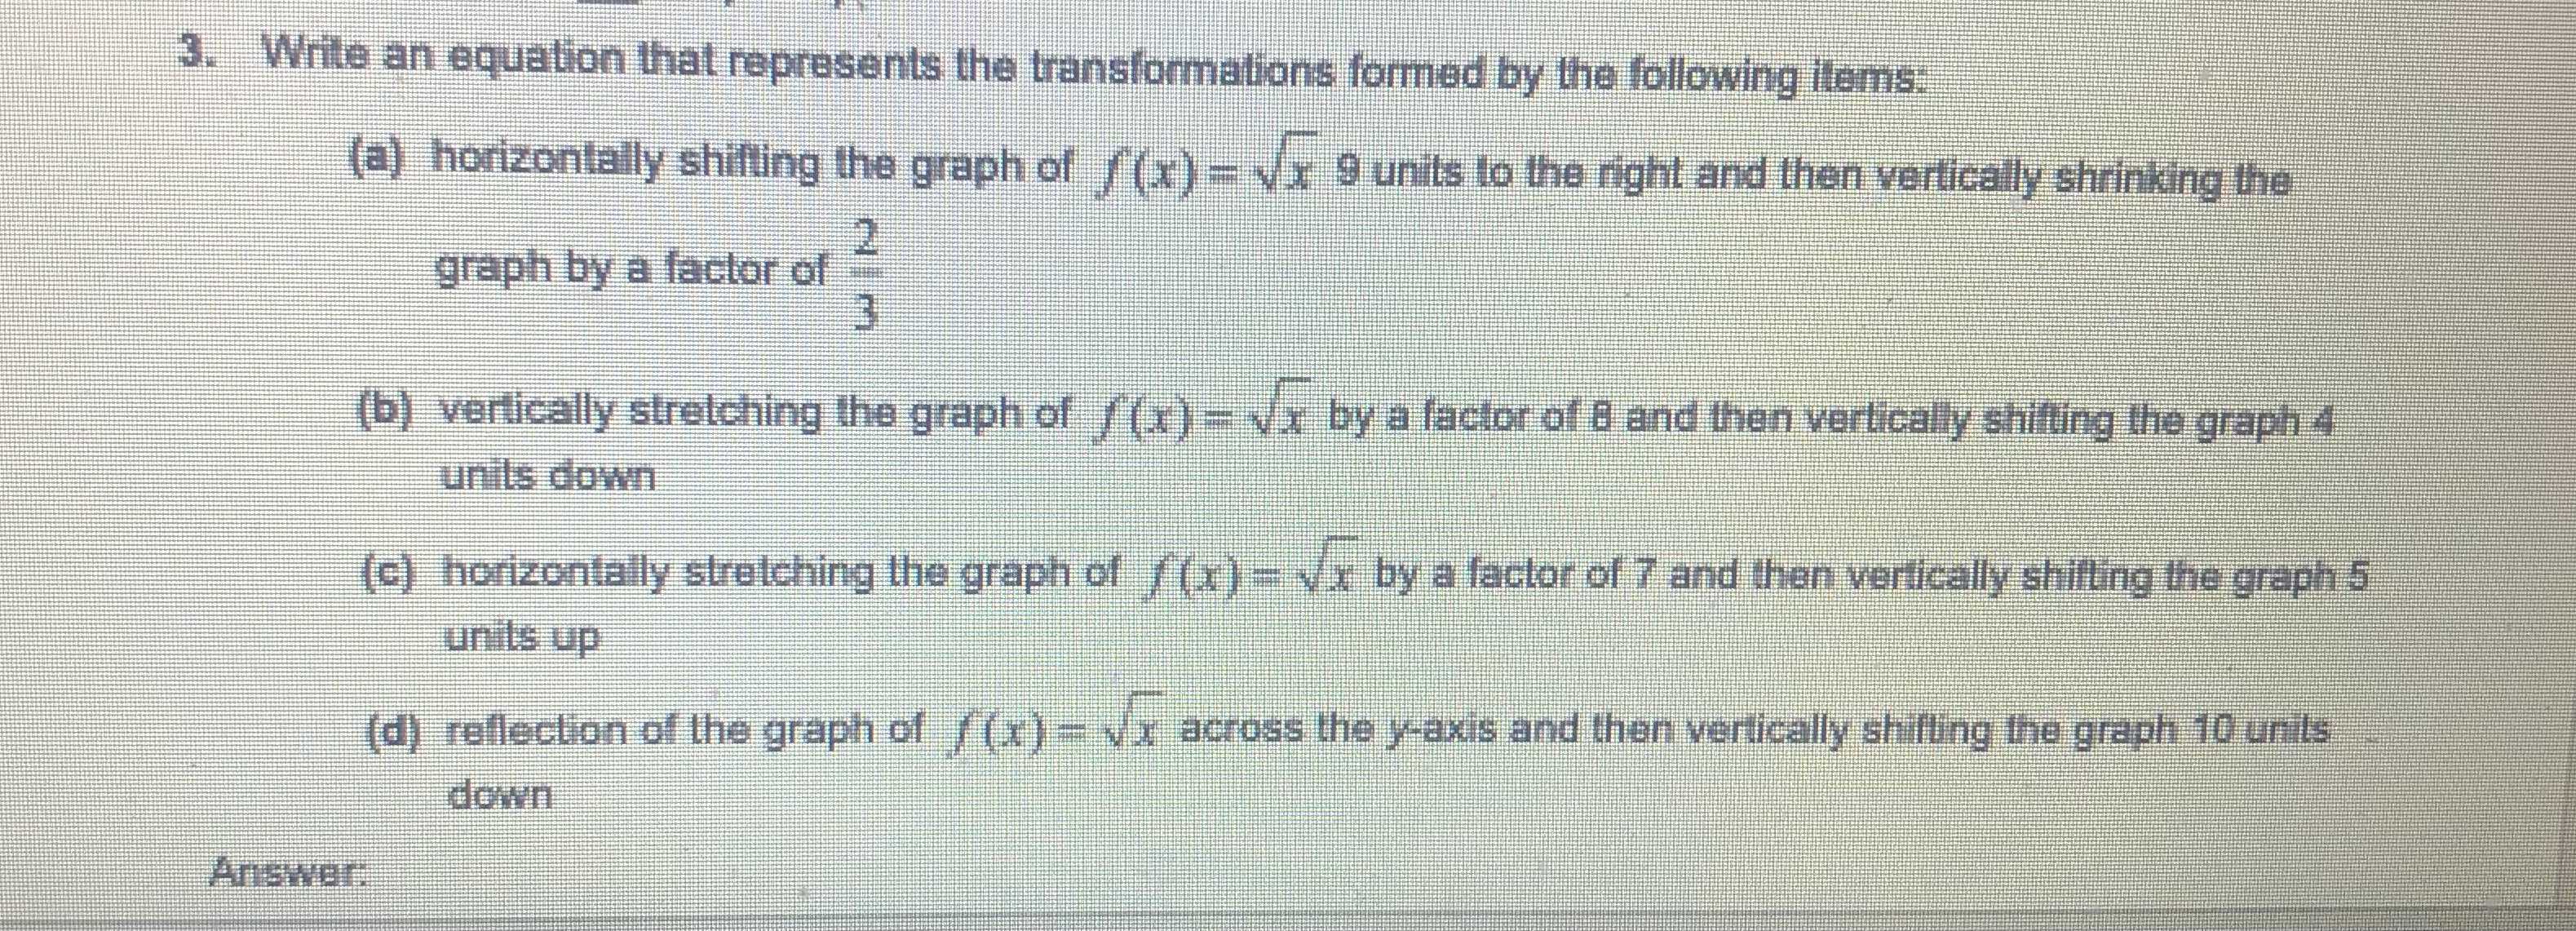 3. Wrile an equation that represents the transform...